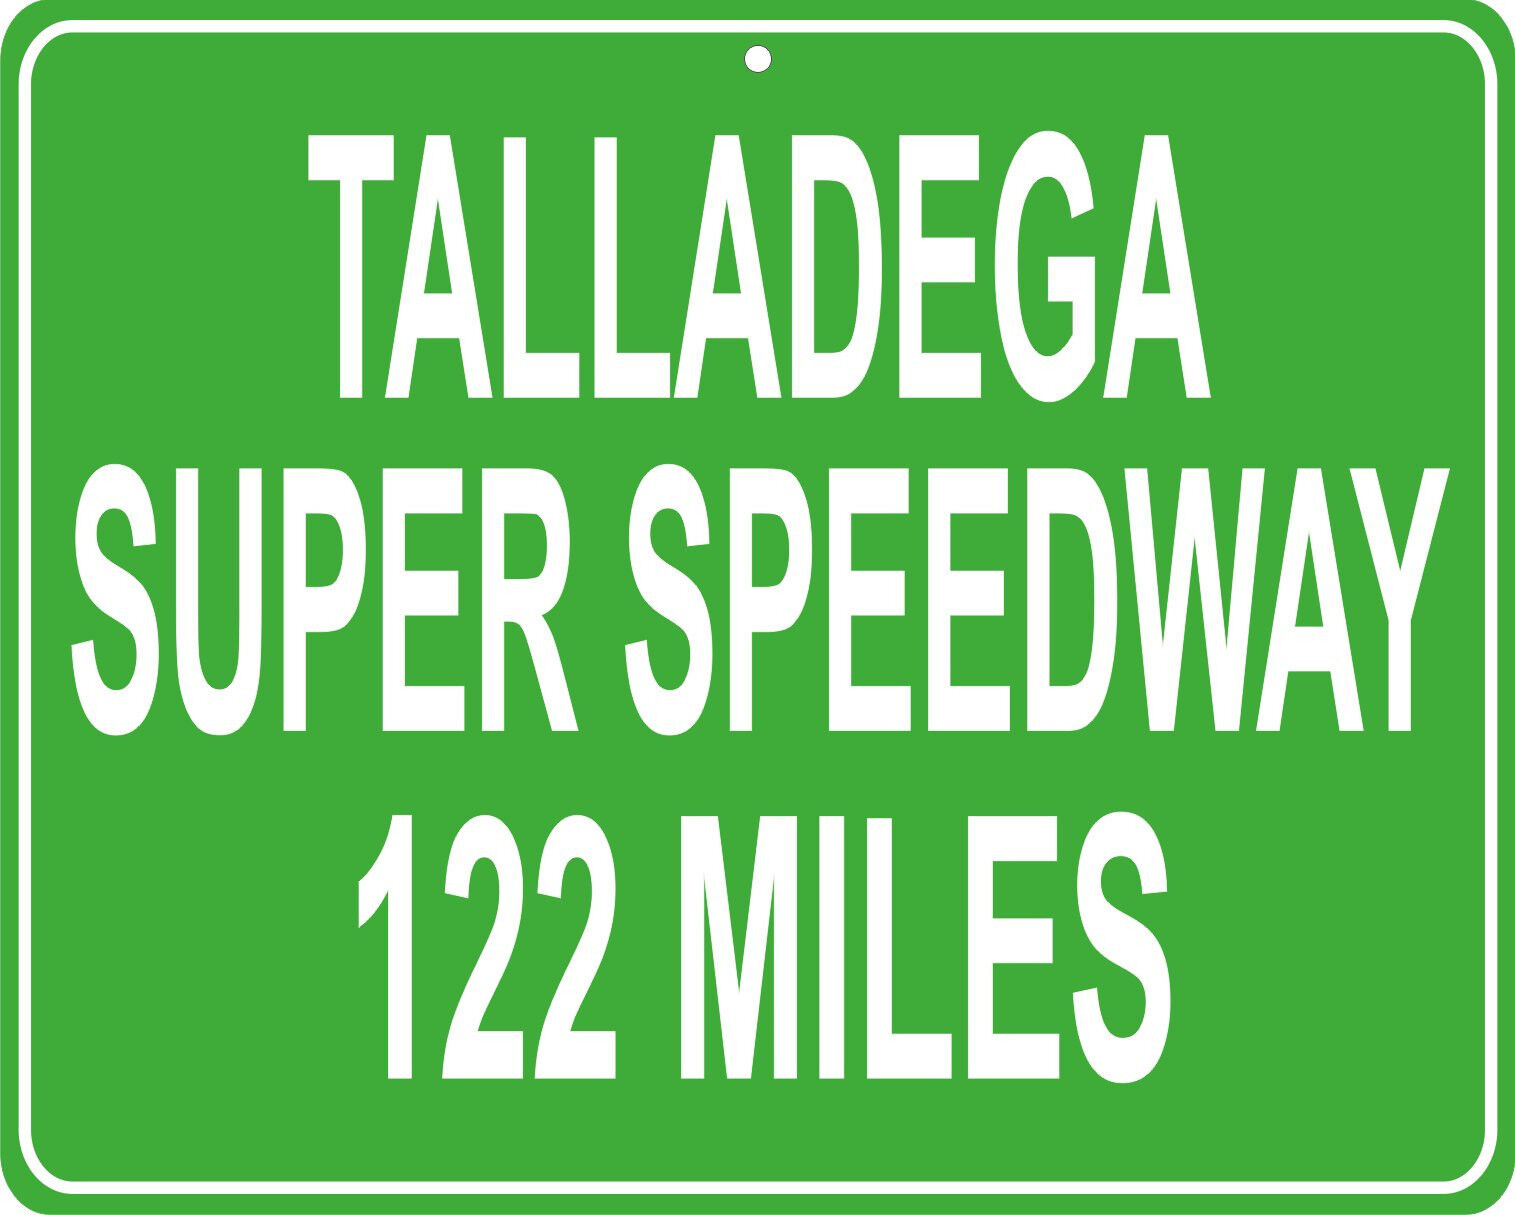 Talladega Super Speedway in Alabama custom mileage sign - distance to your house